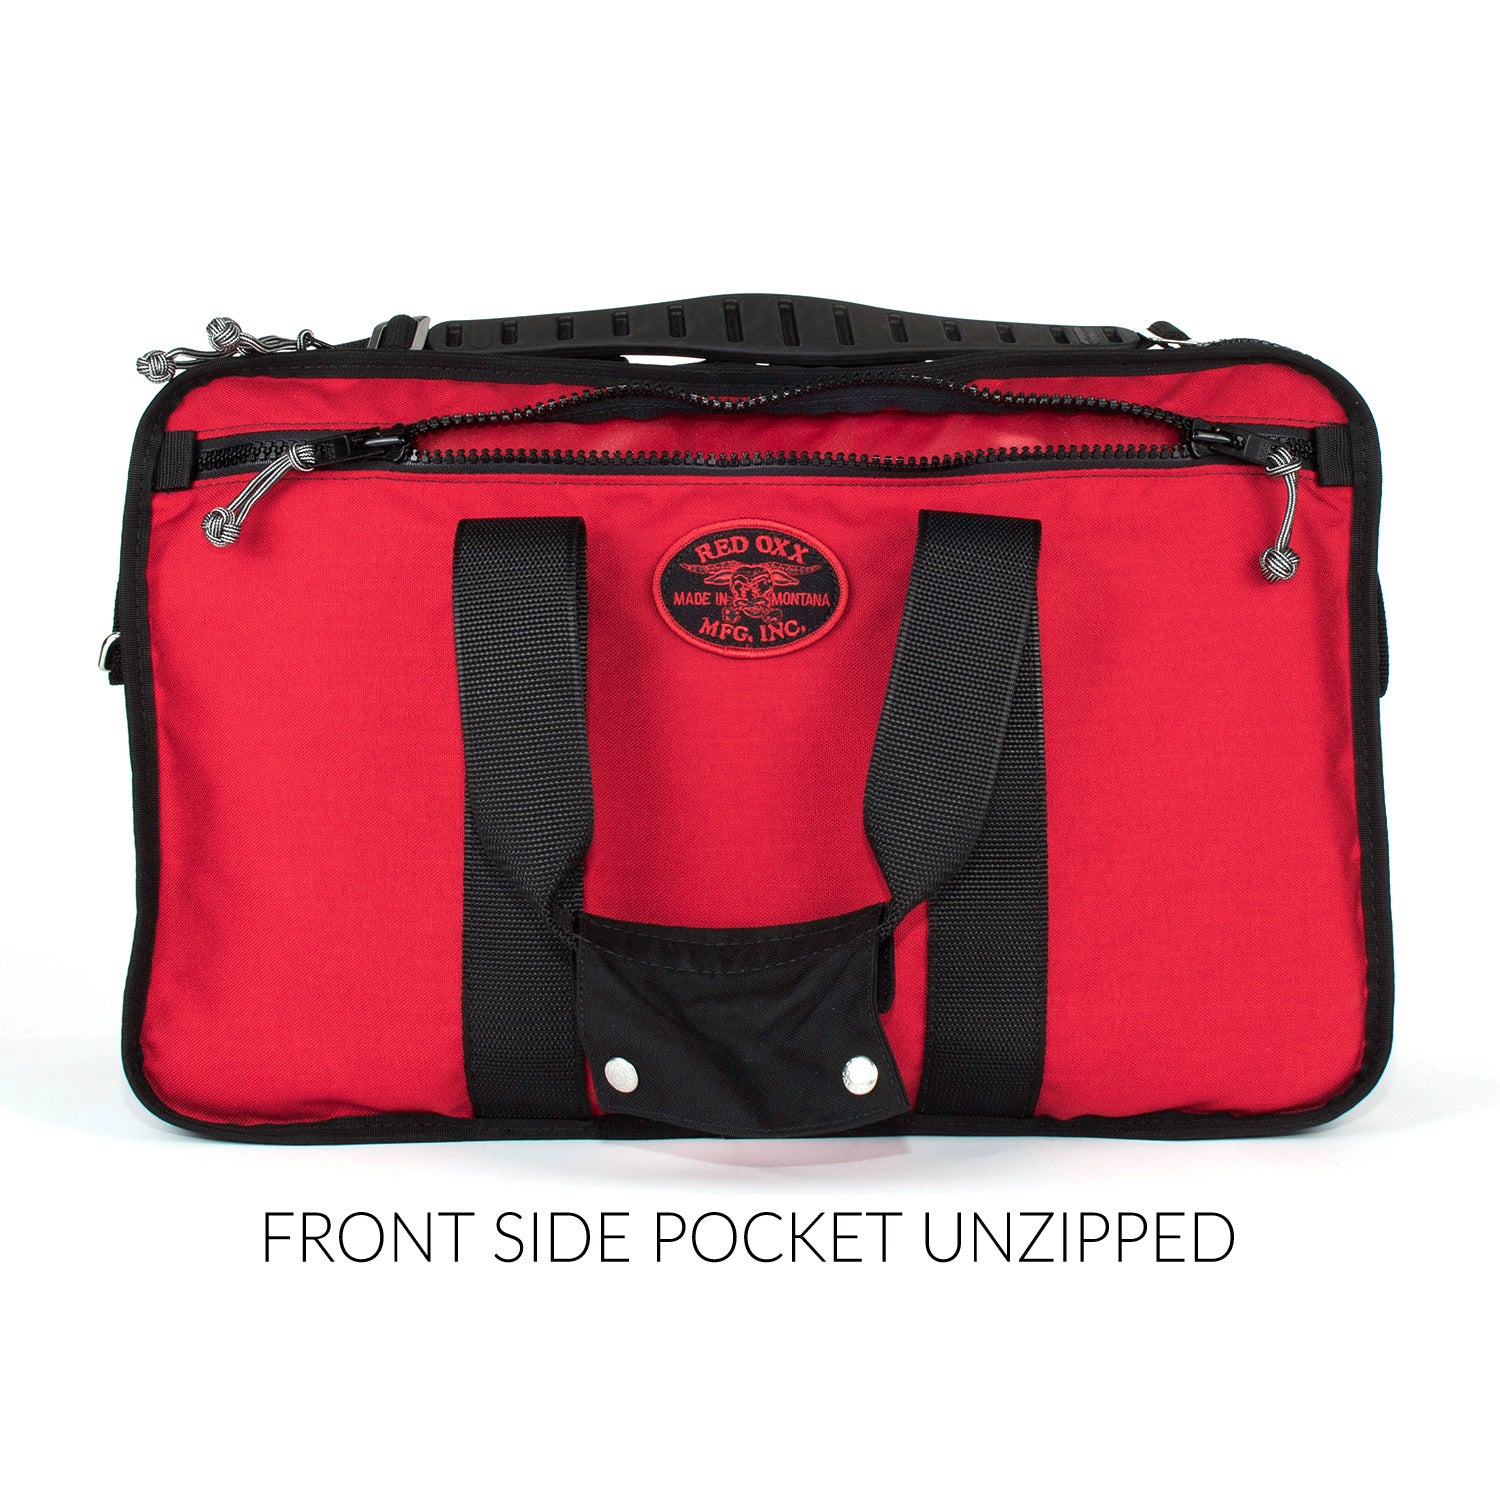 Front side pocket with logo unzipped.